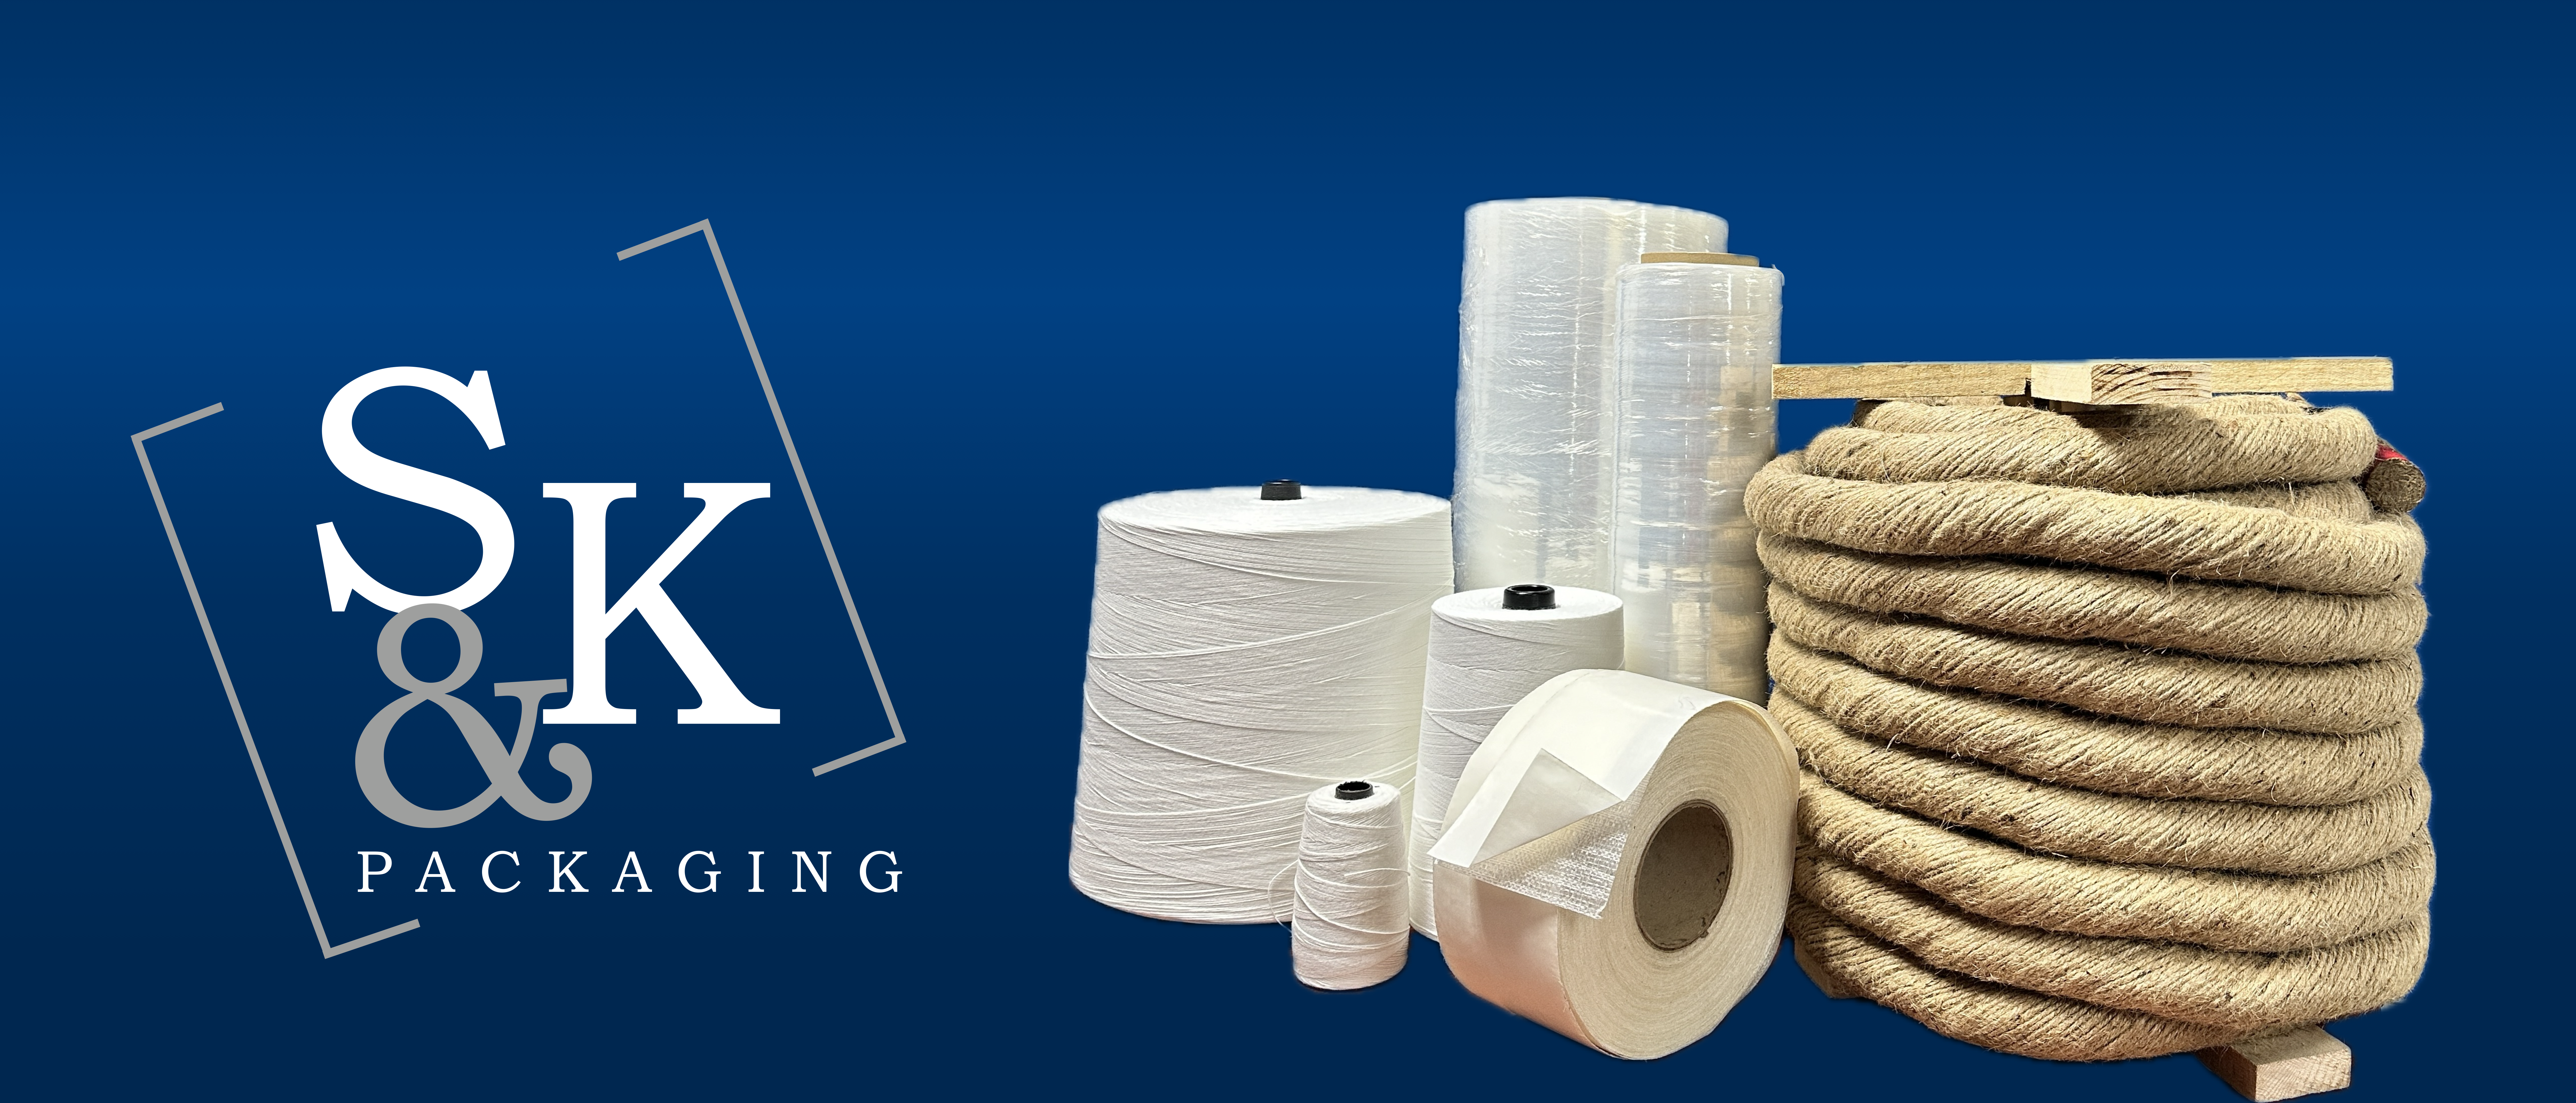 Warehouse Supplies by S & K Packaging